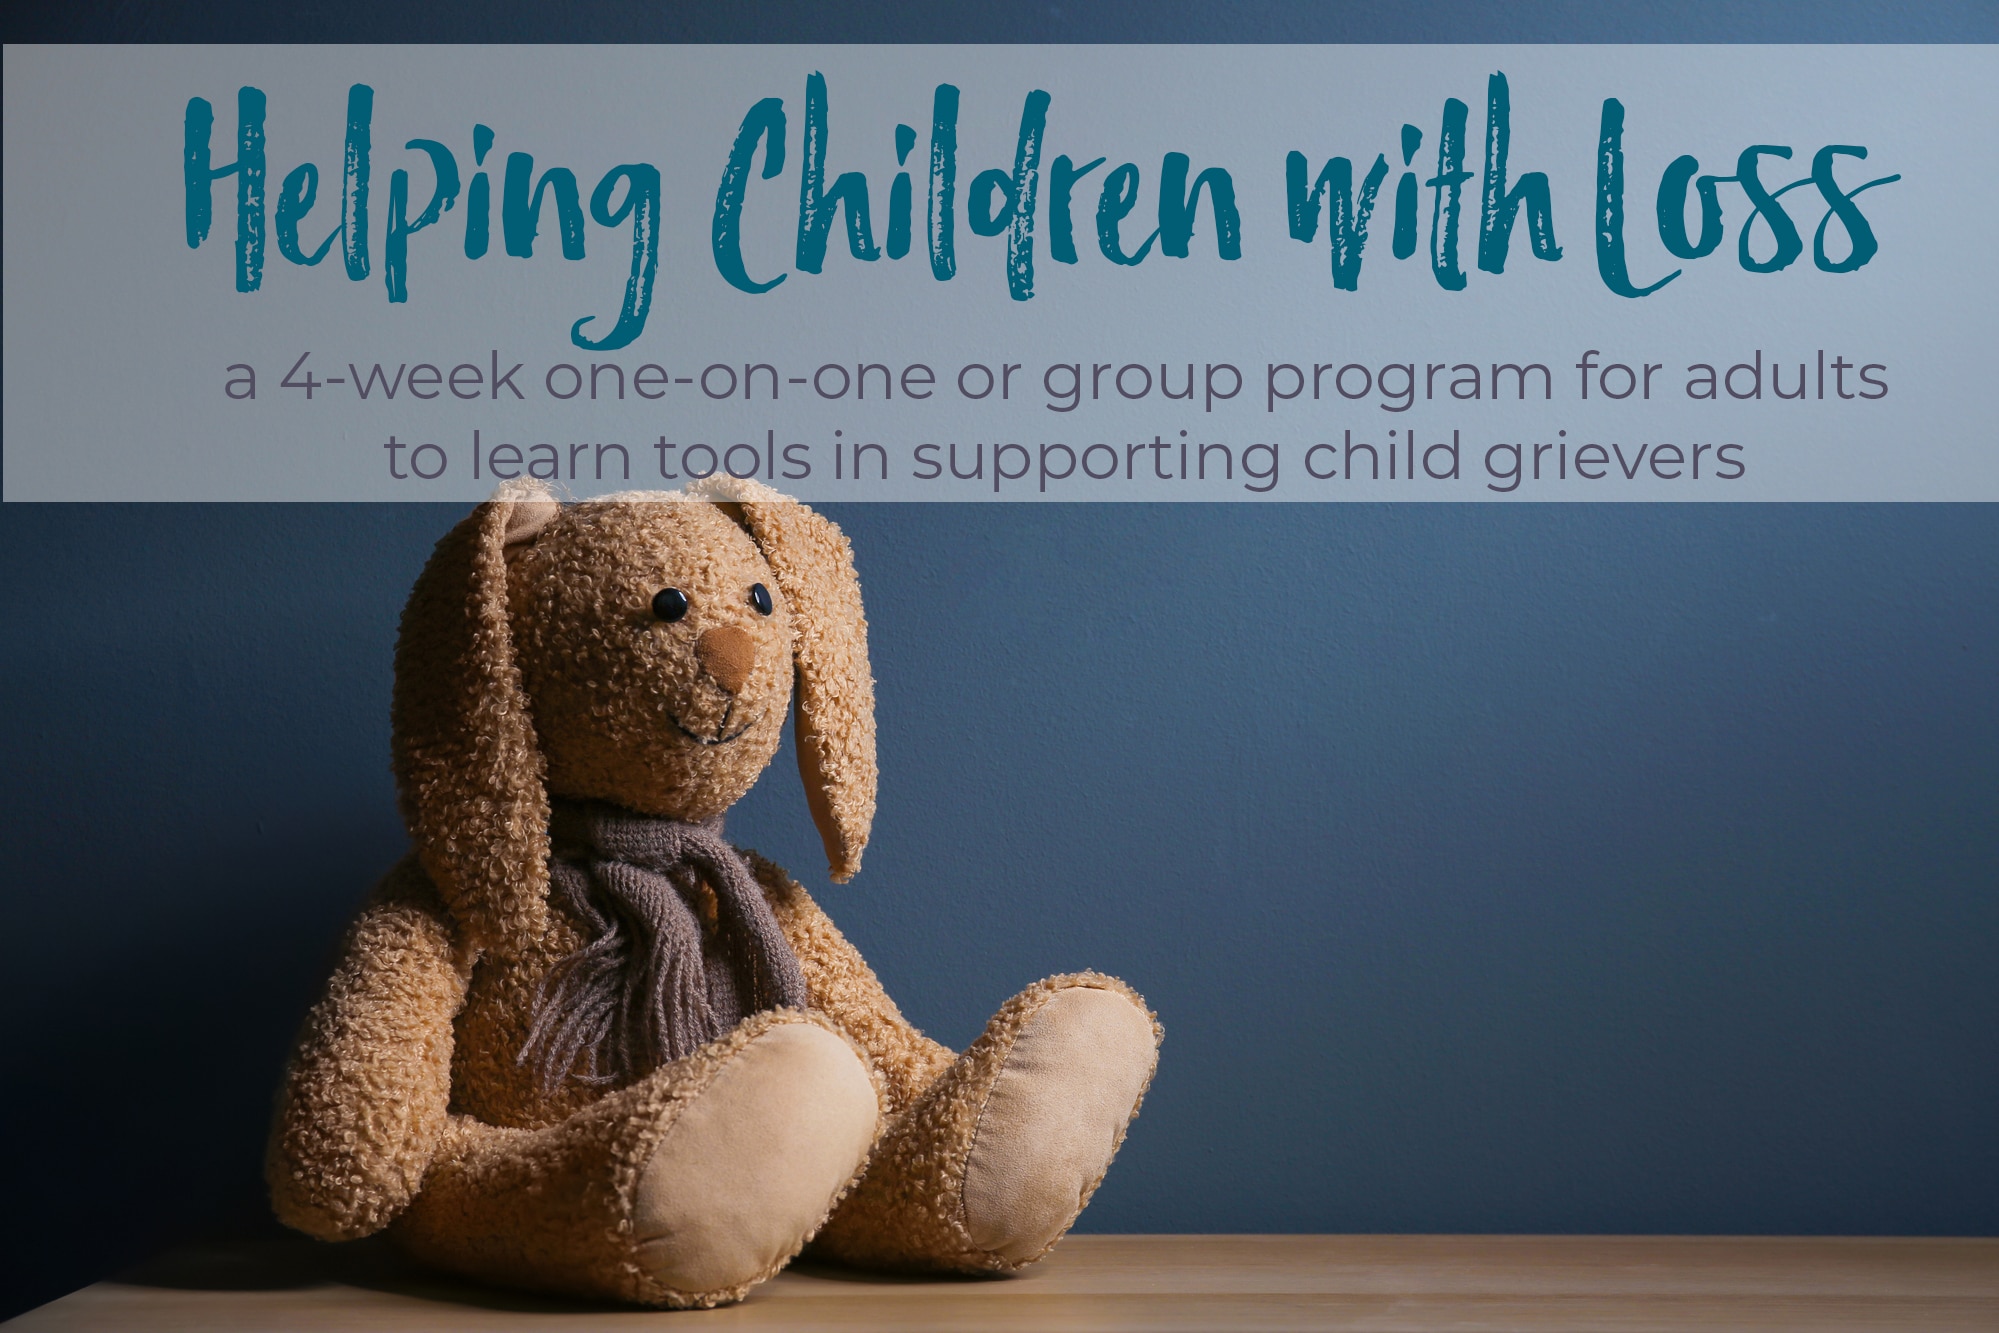 Helping Children with Loss Program